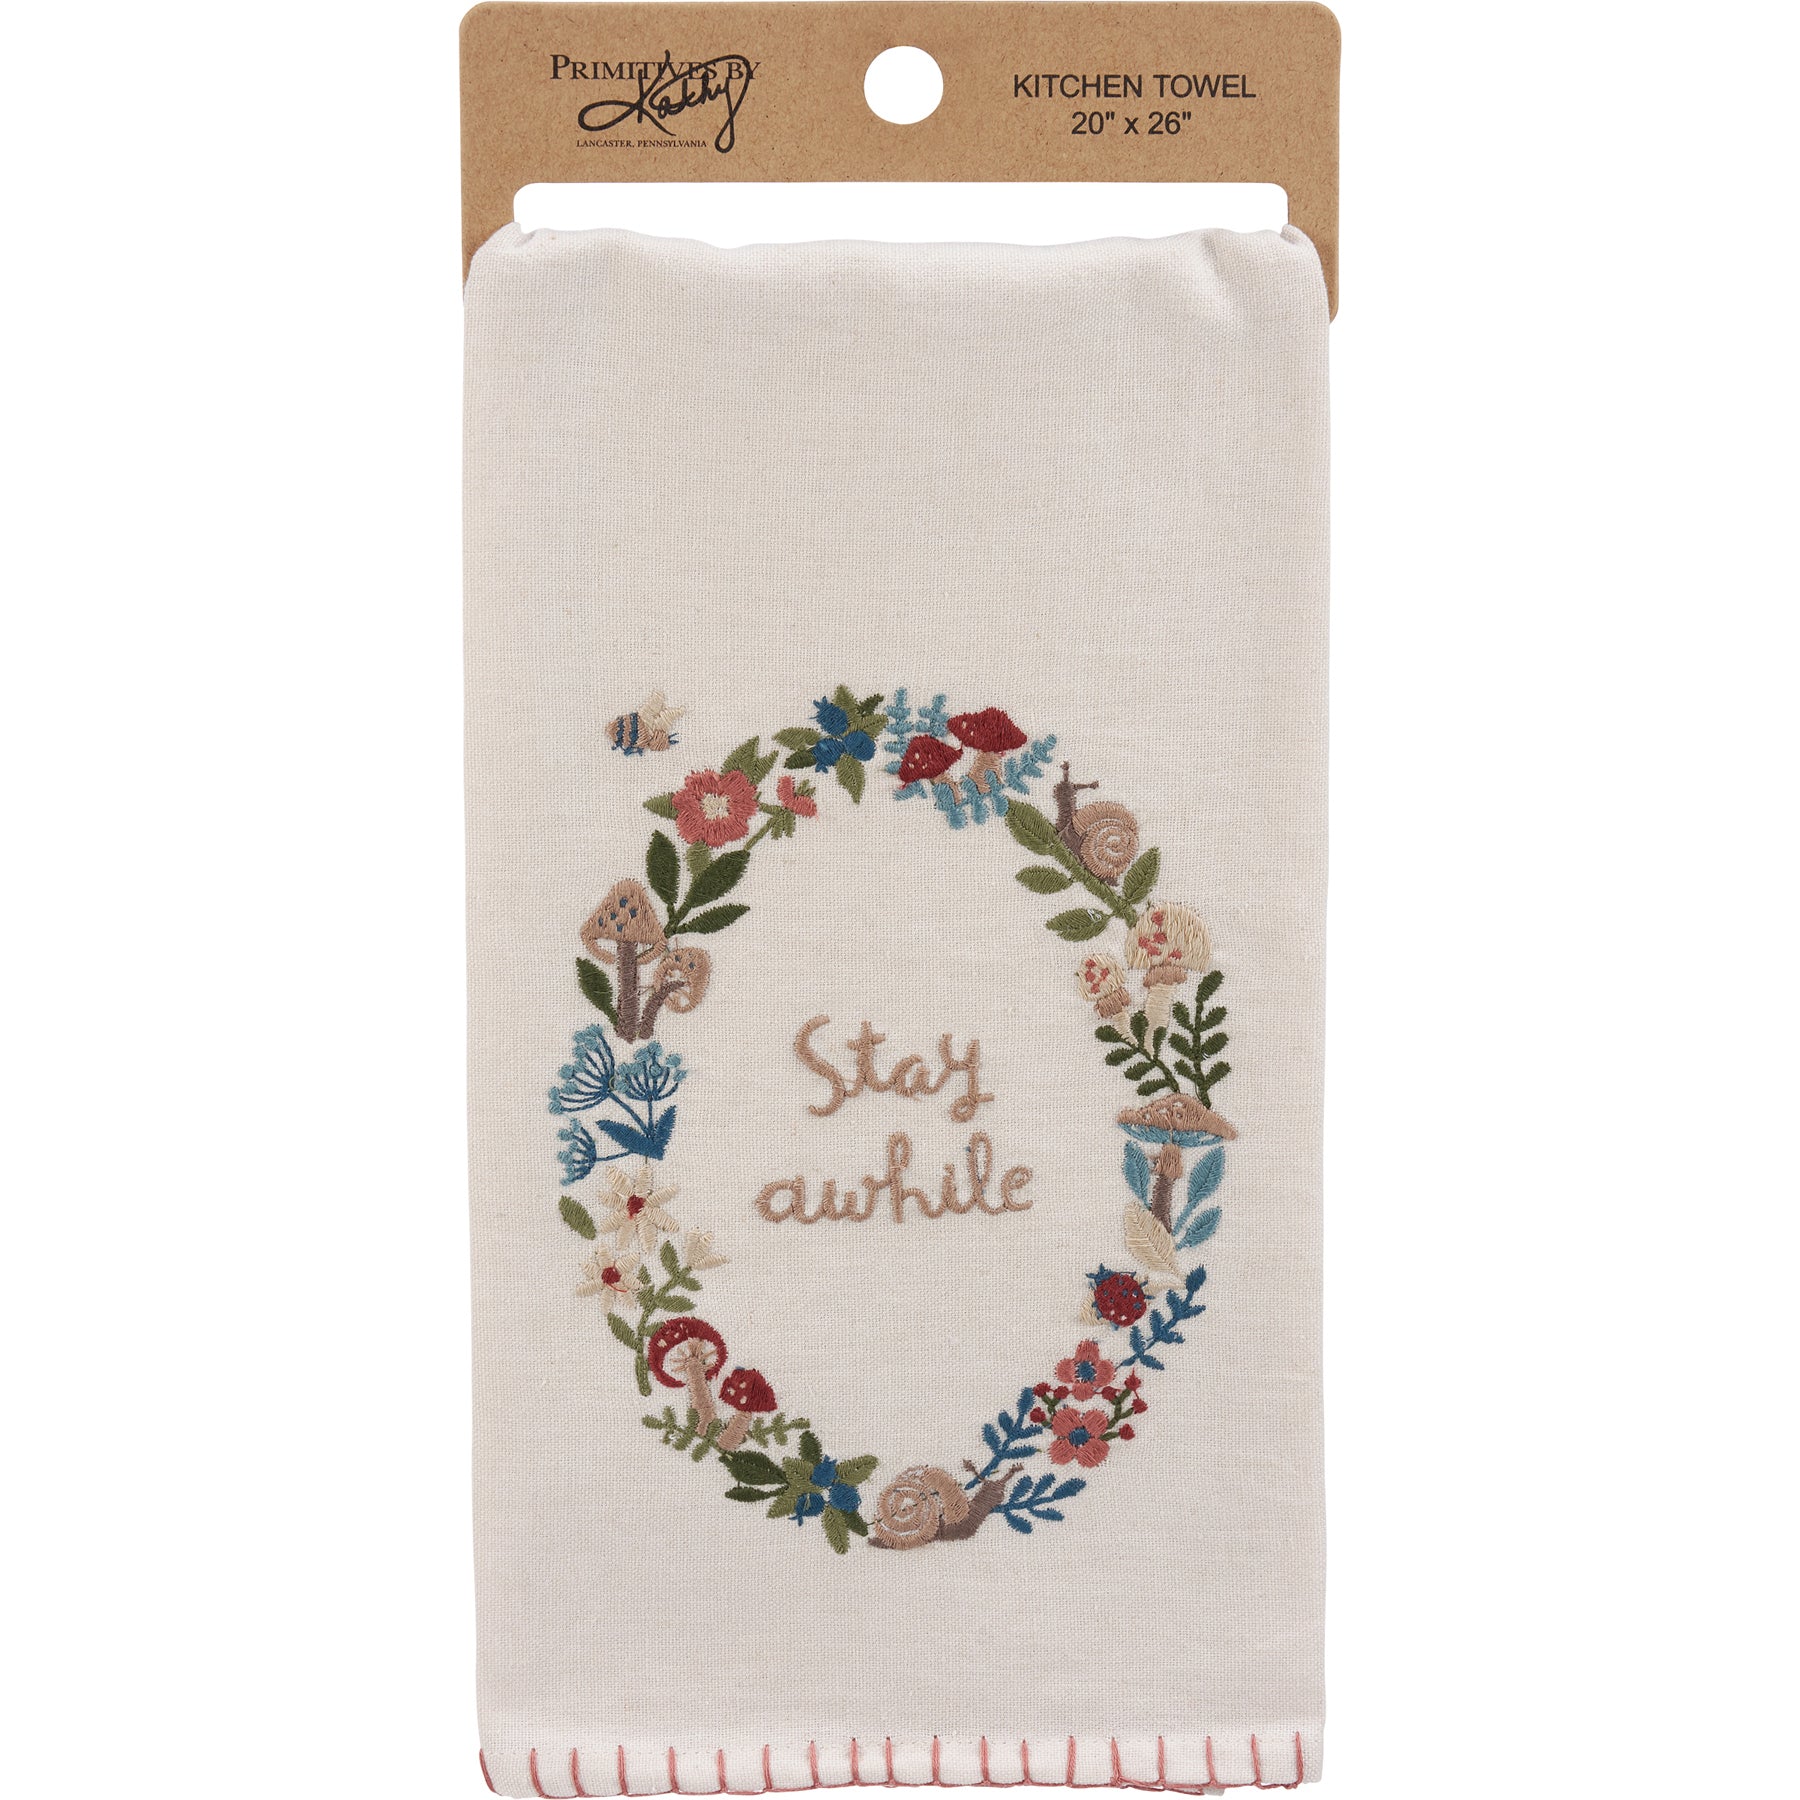 Stay Awhile Kitchen Towel